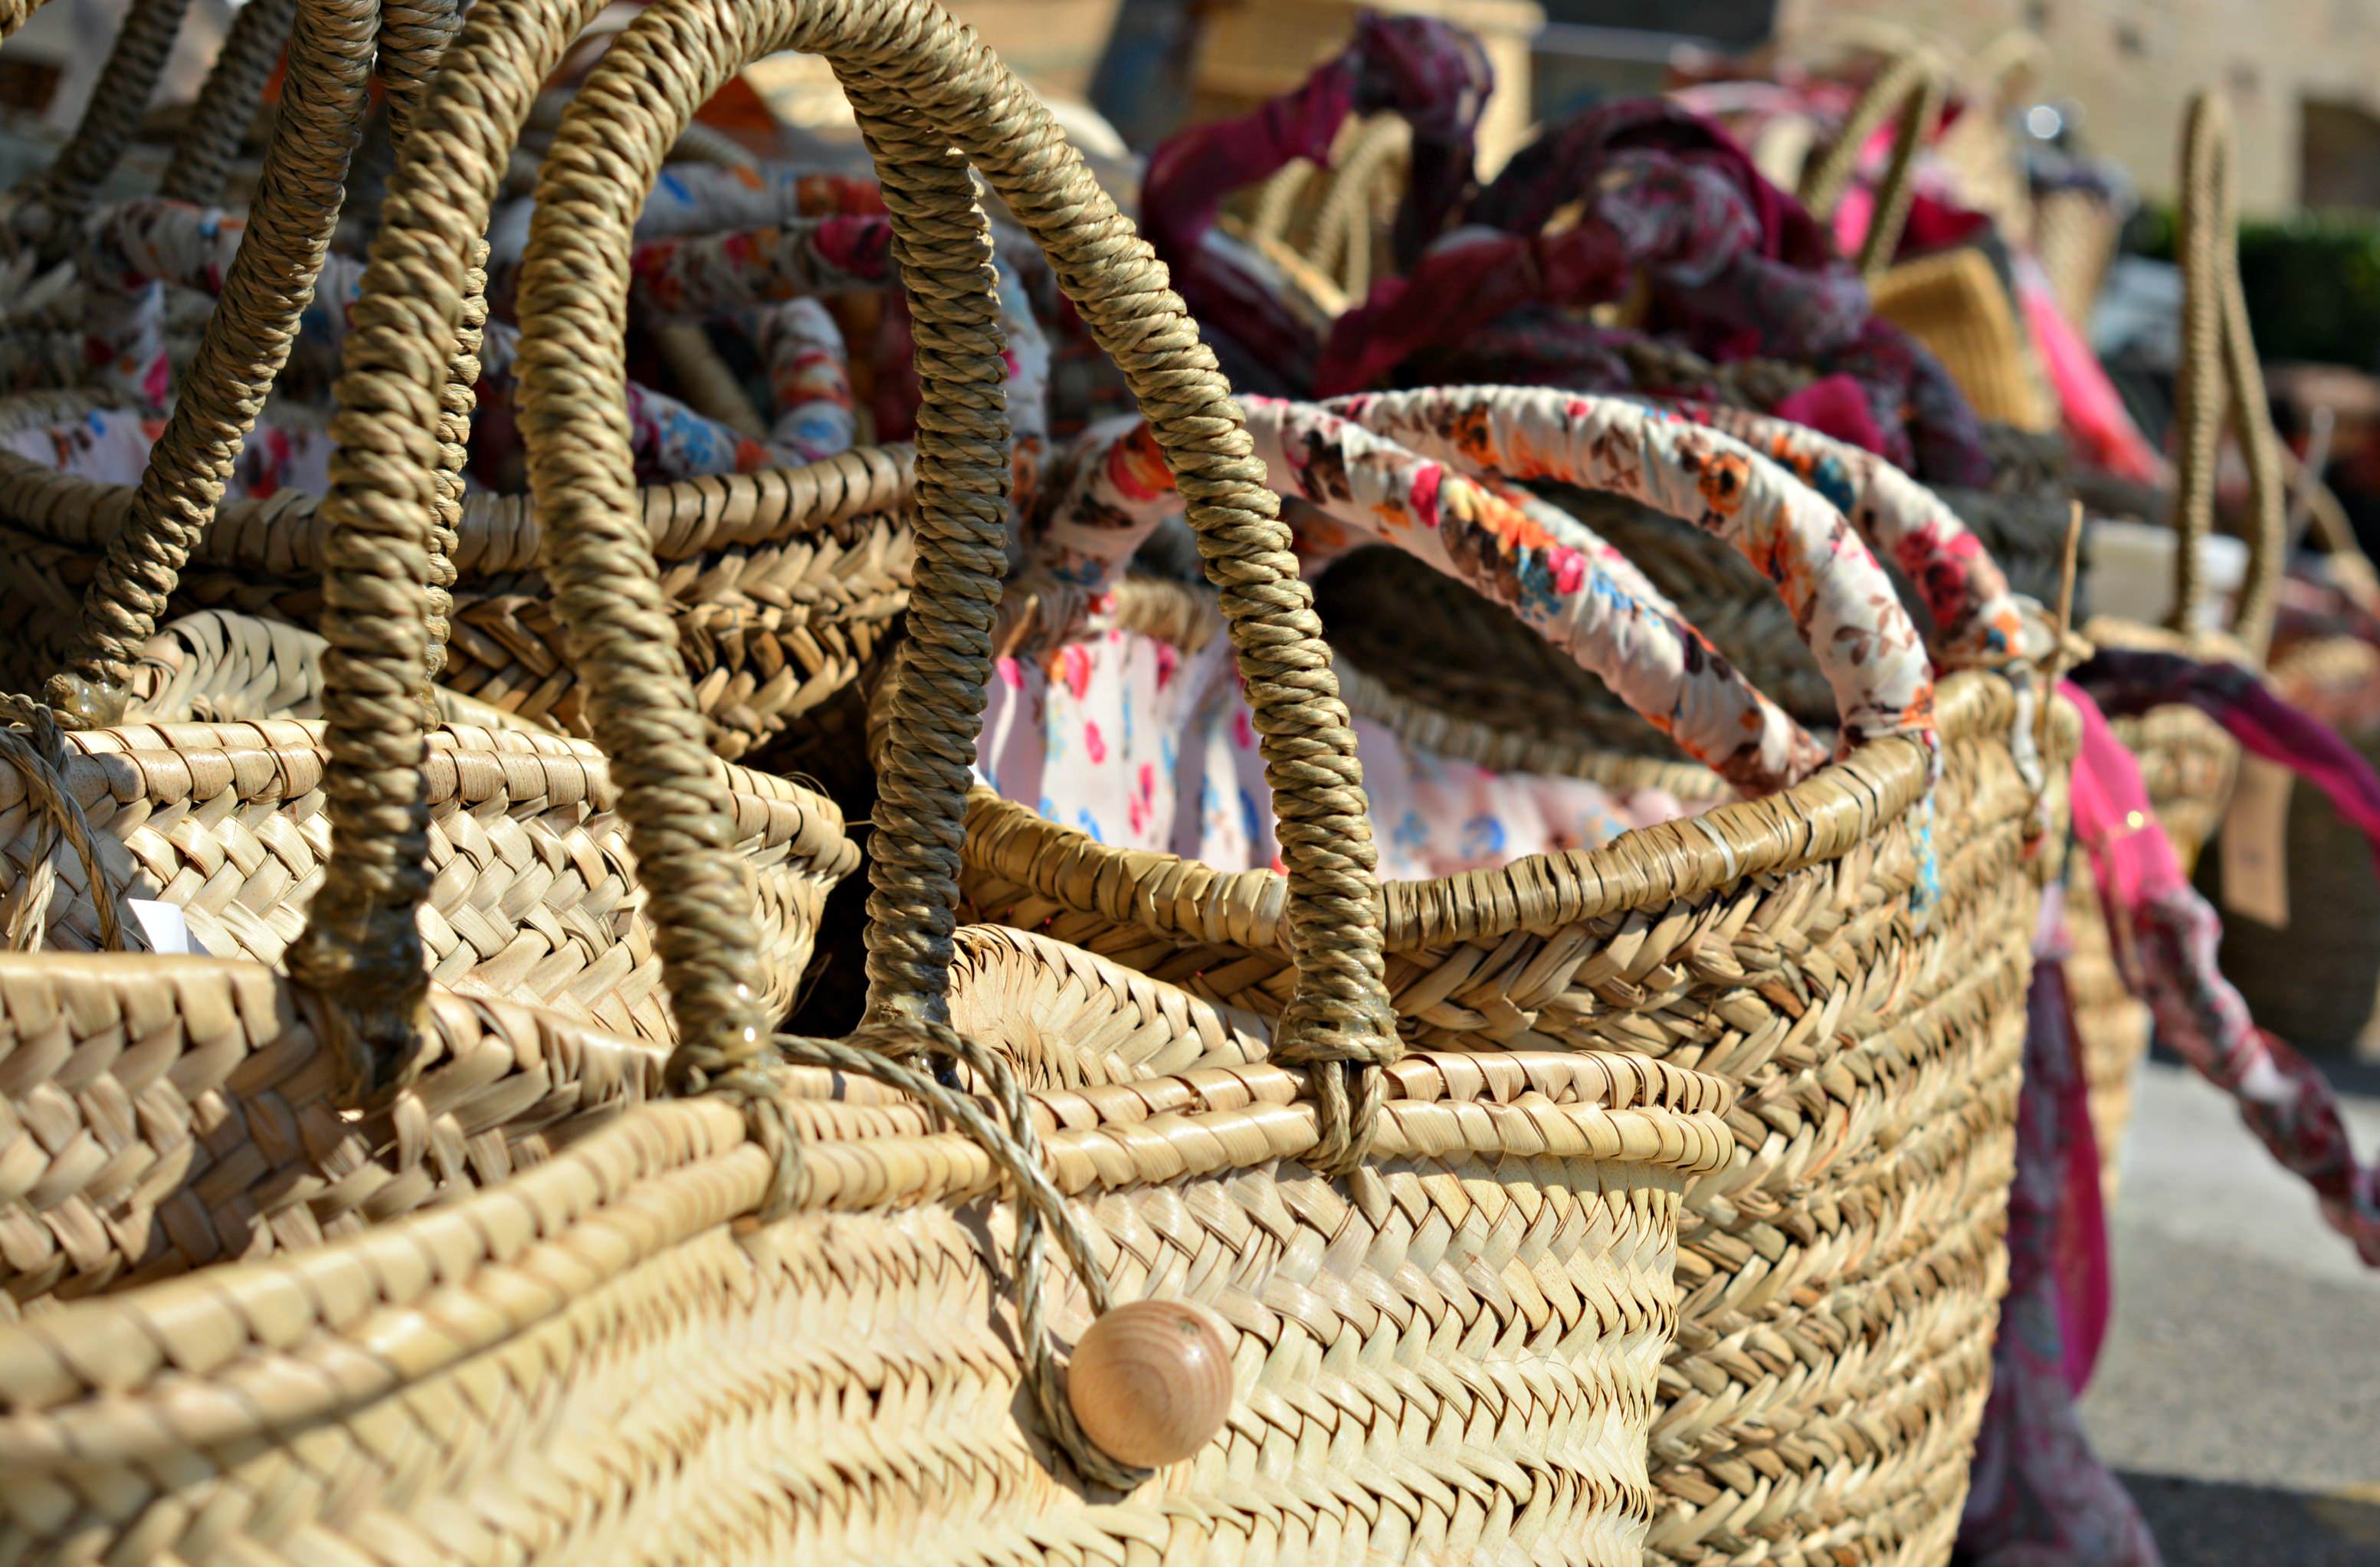 Cervia - Bikes & Boats on The Adriatic - Hand woven baskets at the market